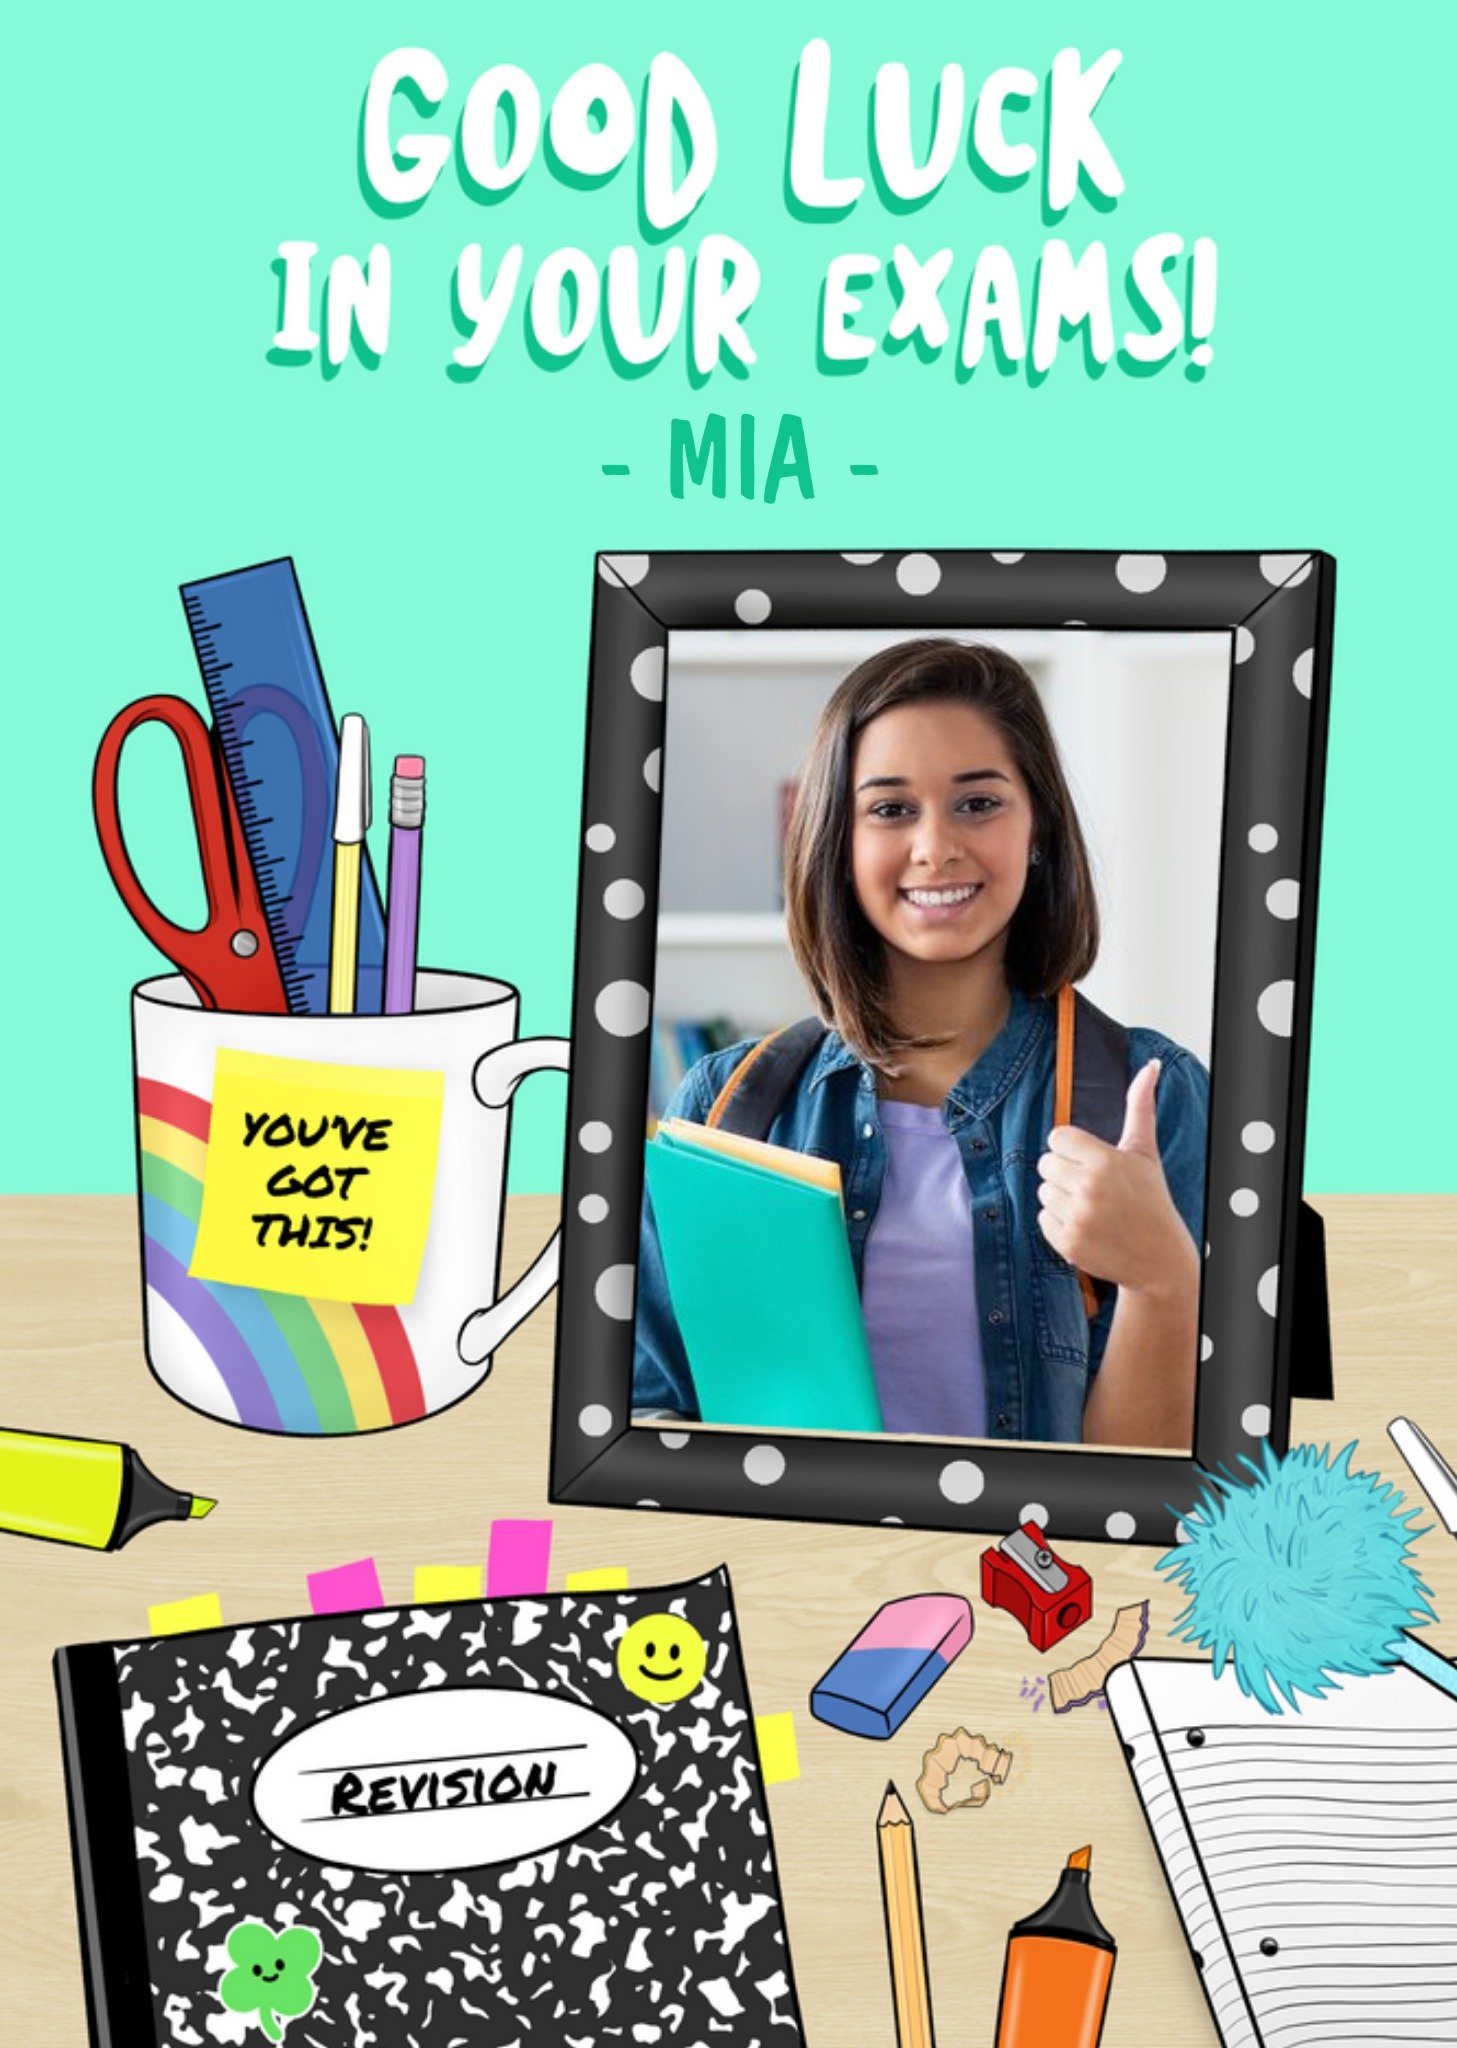 Moonpig Illustration Of A Desk With Stationery And A Photo Frame Good Luck In Your Exams Photo Uploa